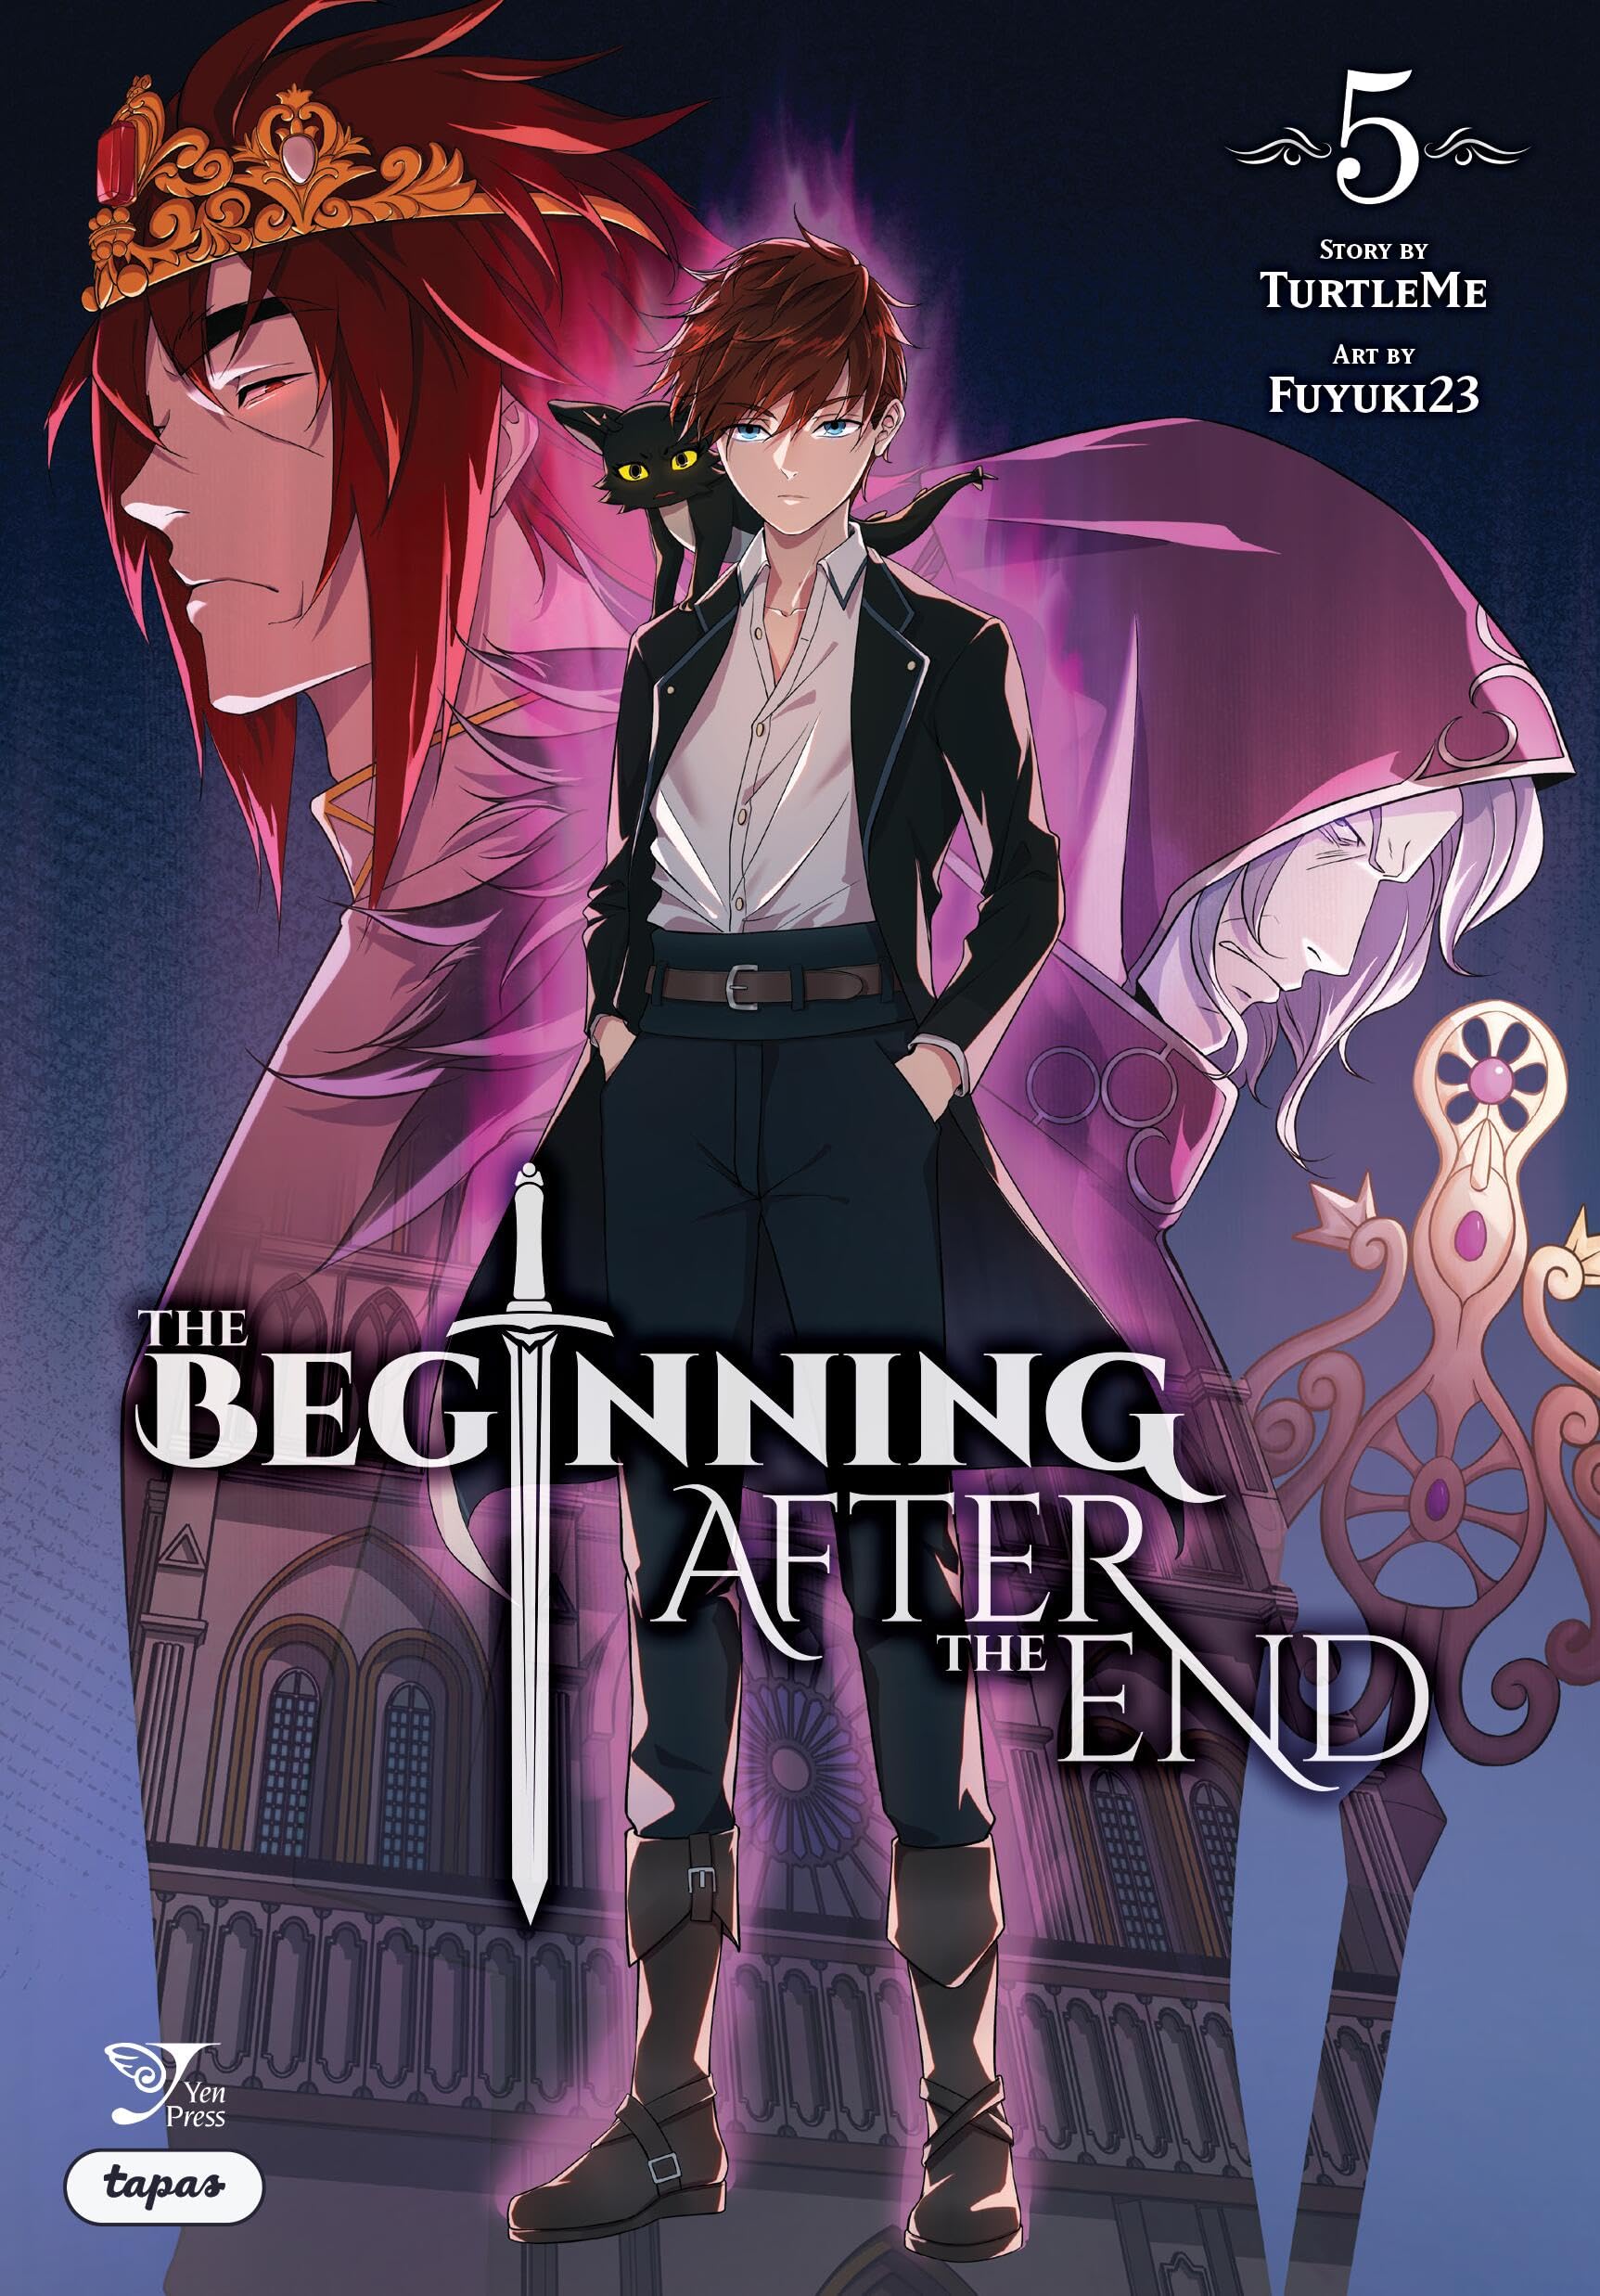 The Beginning After the End, Vol. 5 (comic) (The Beginning After the End (comic), 5)